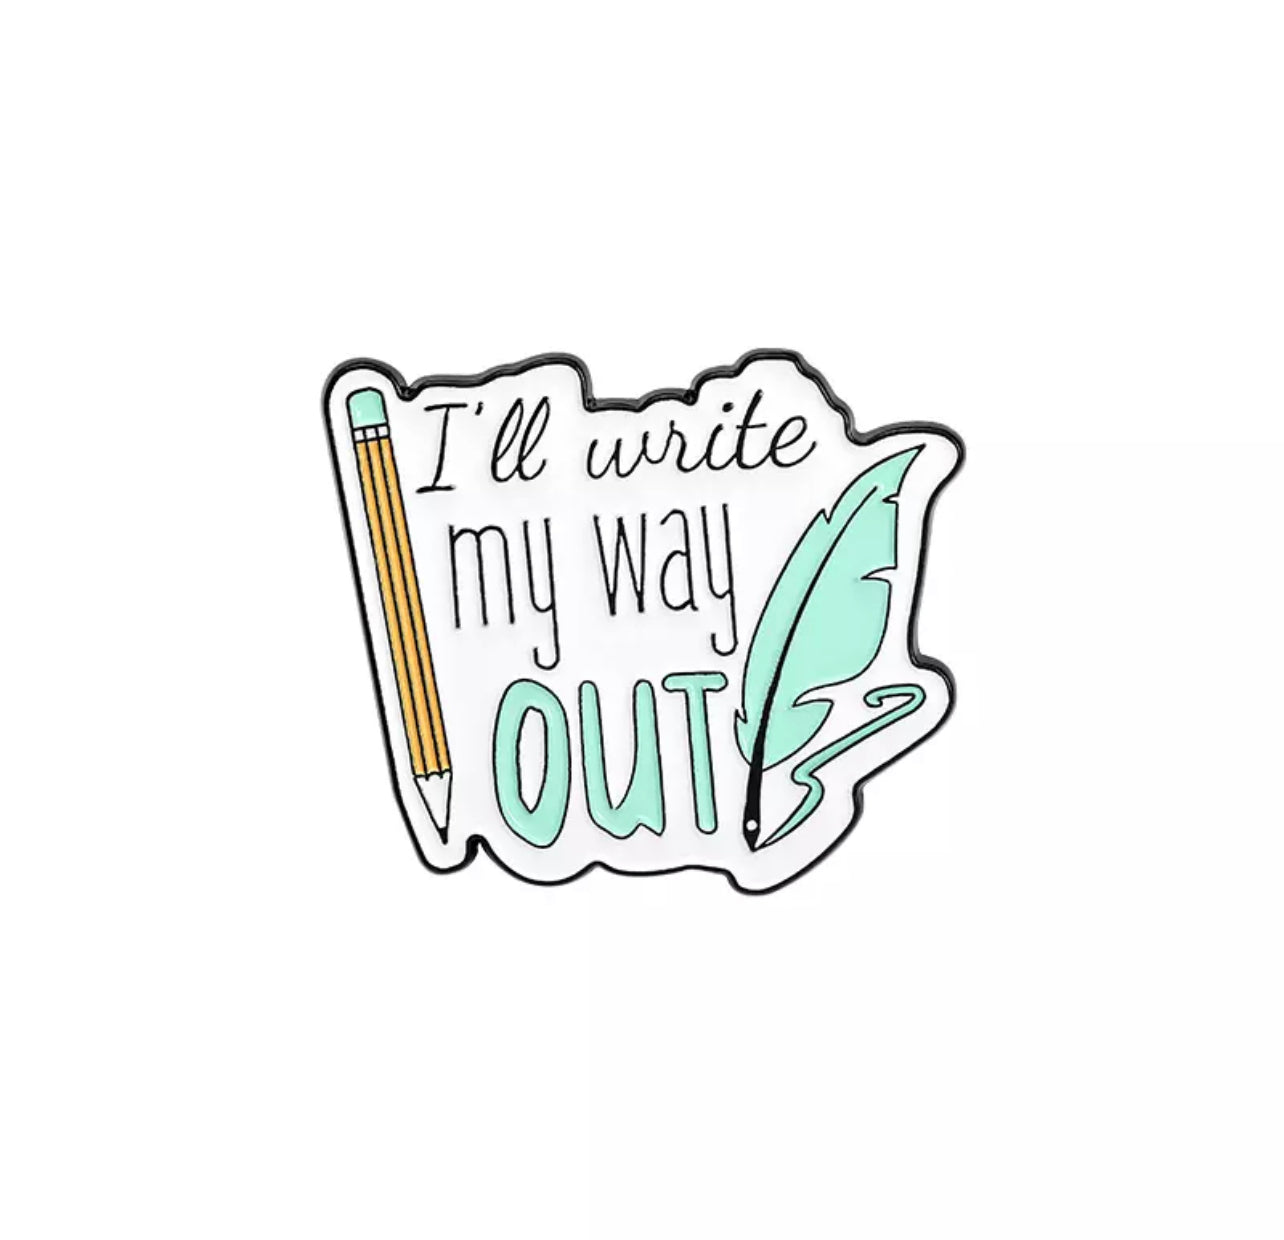 I’ll write my way out